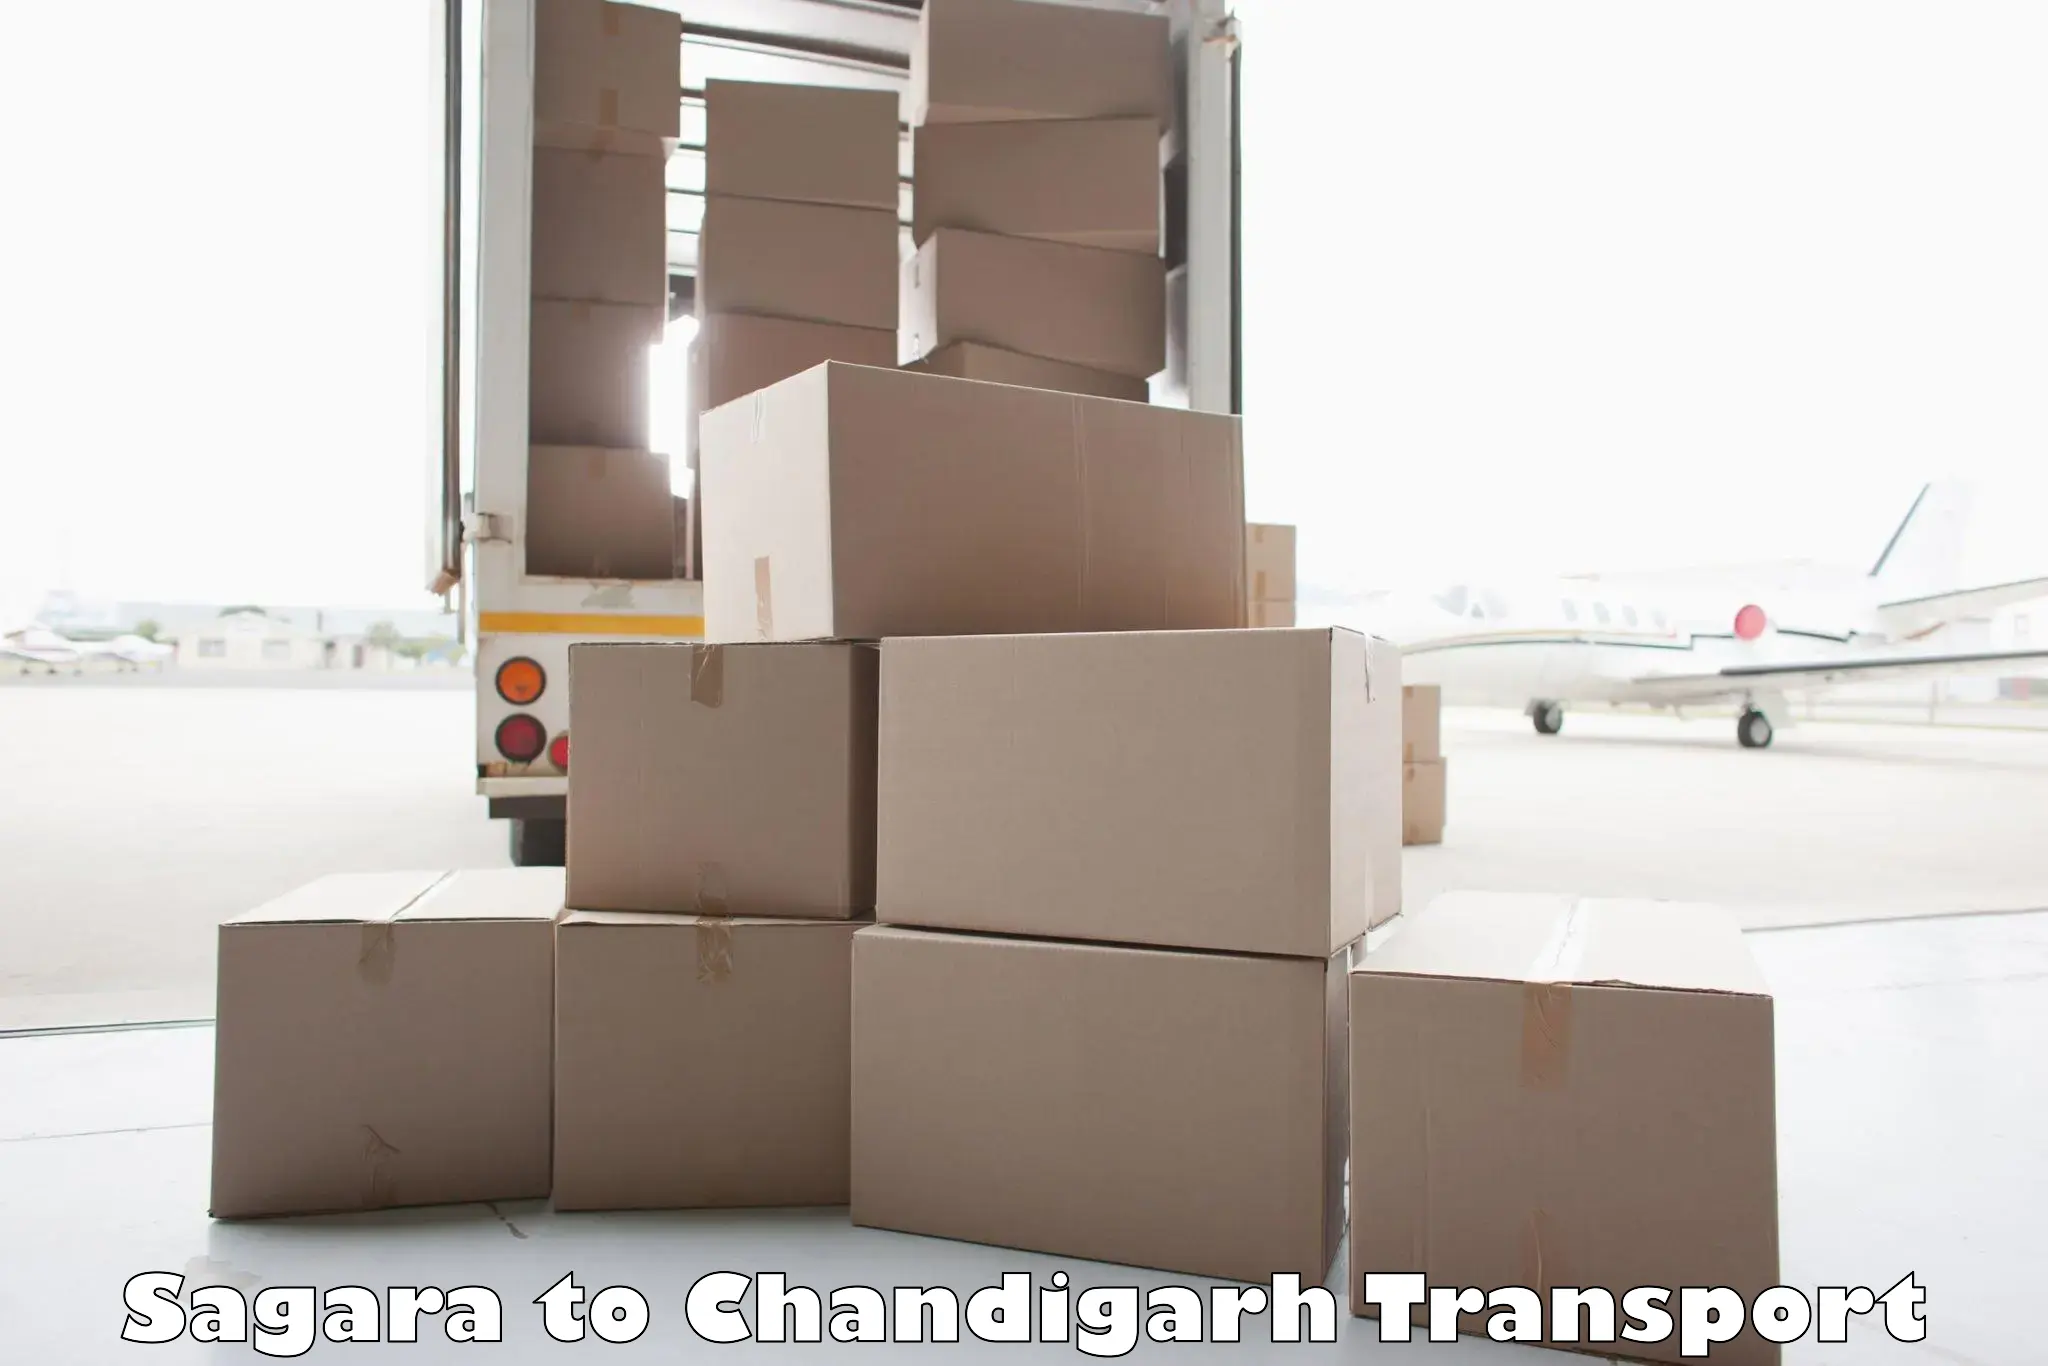 Transport bike from one state to another Sagara to Chandigarh